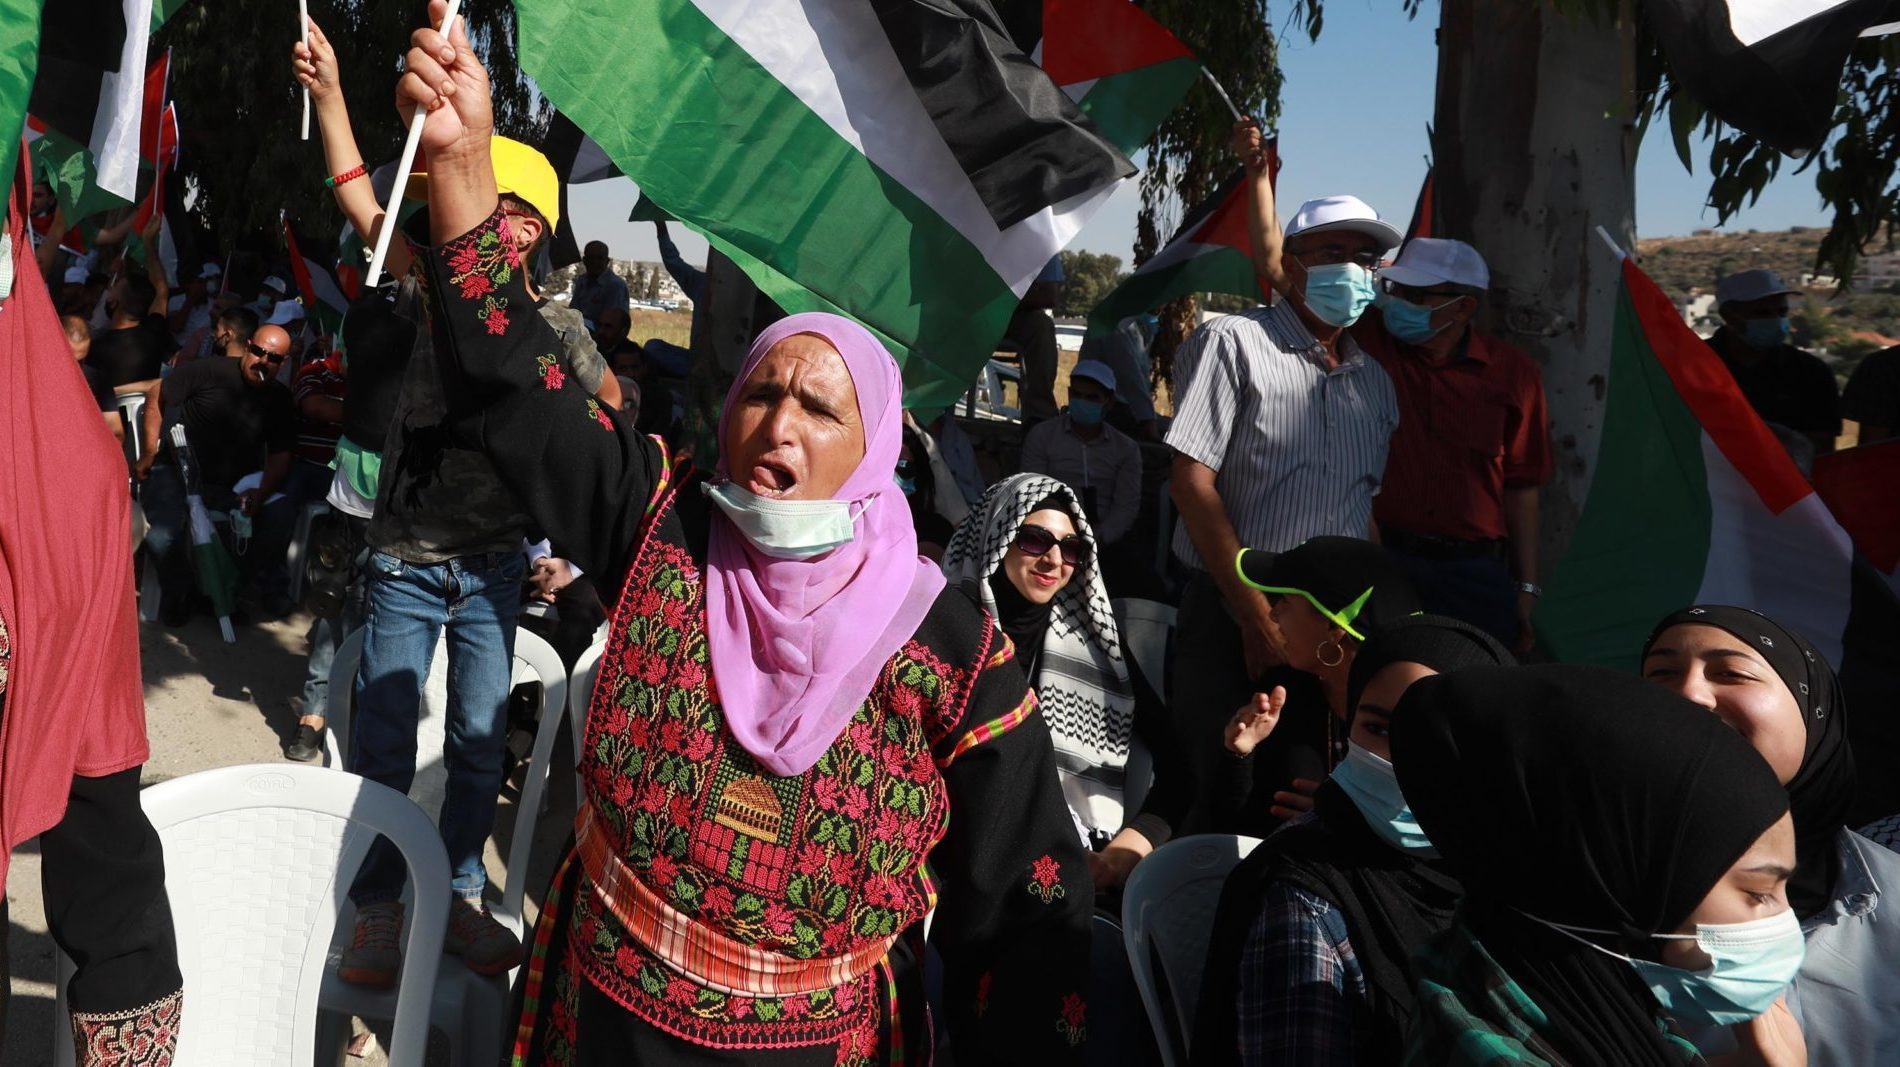 Palestinians Plan to Block Israel-UAE Accord (with VIDEO)